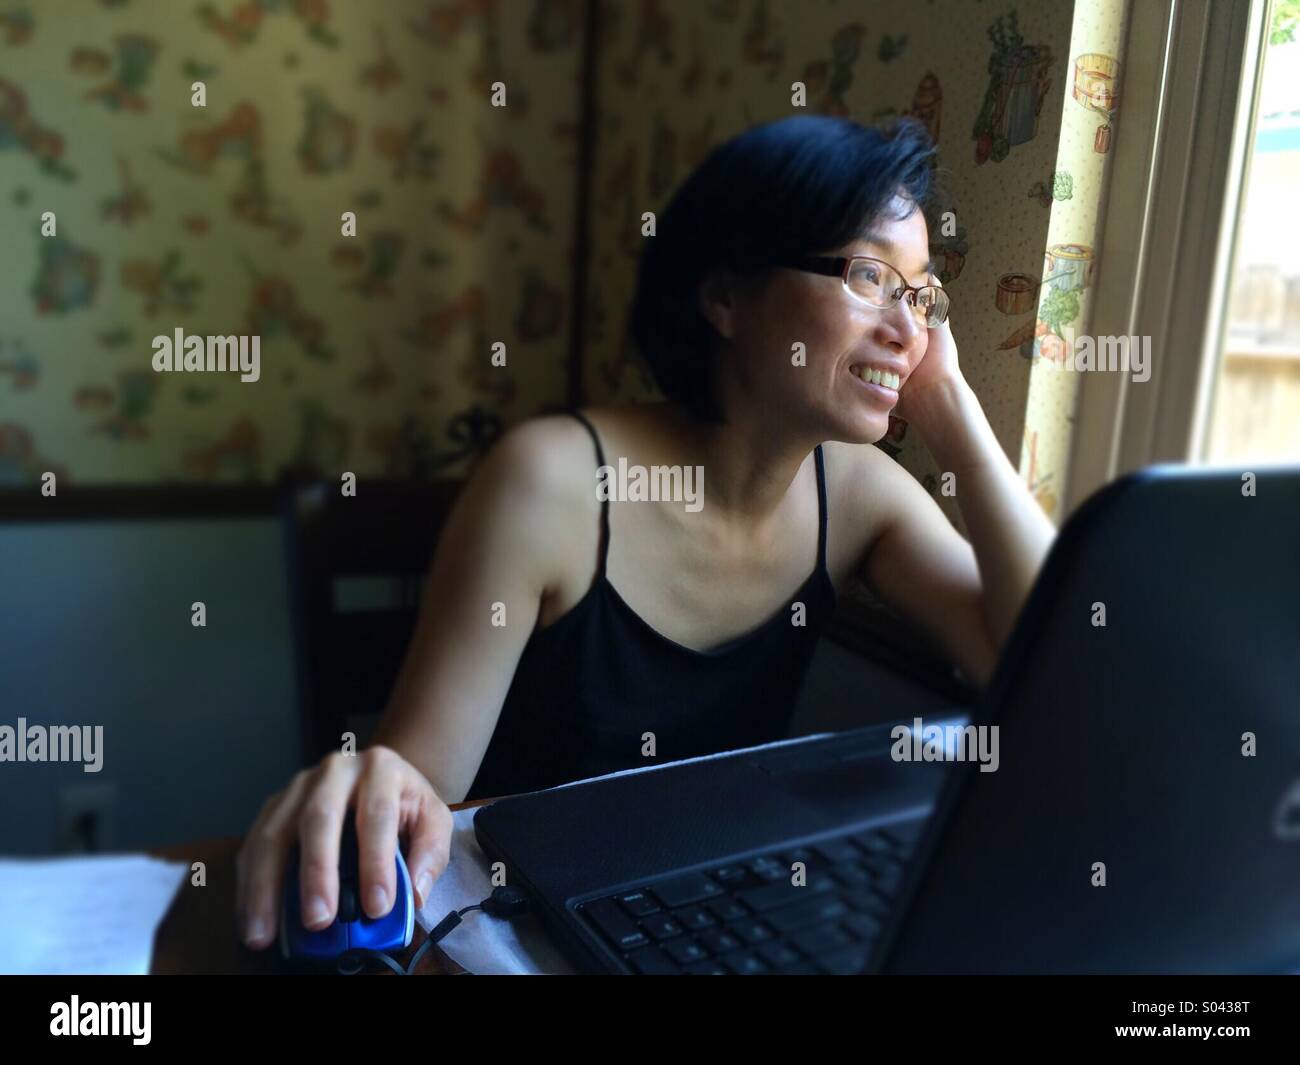 Asian woman smiling and looking out a window while using a laptop computer at home Stock Photo